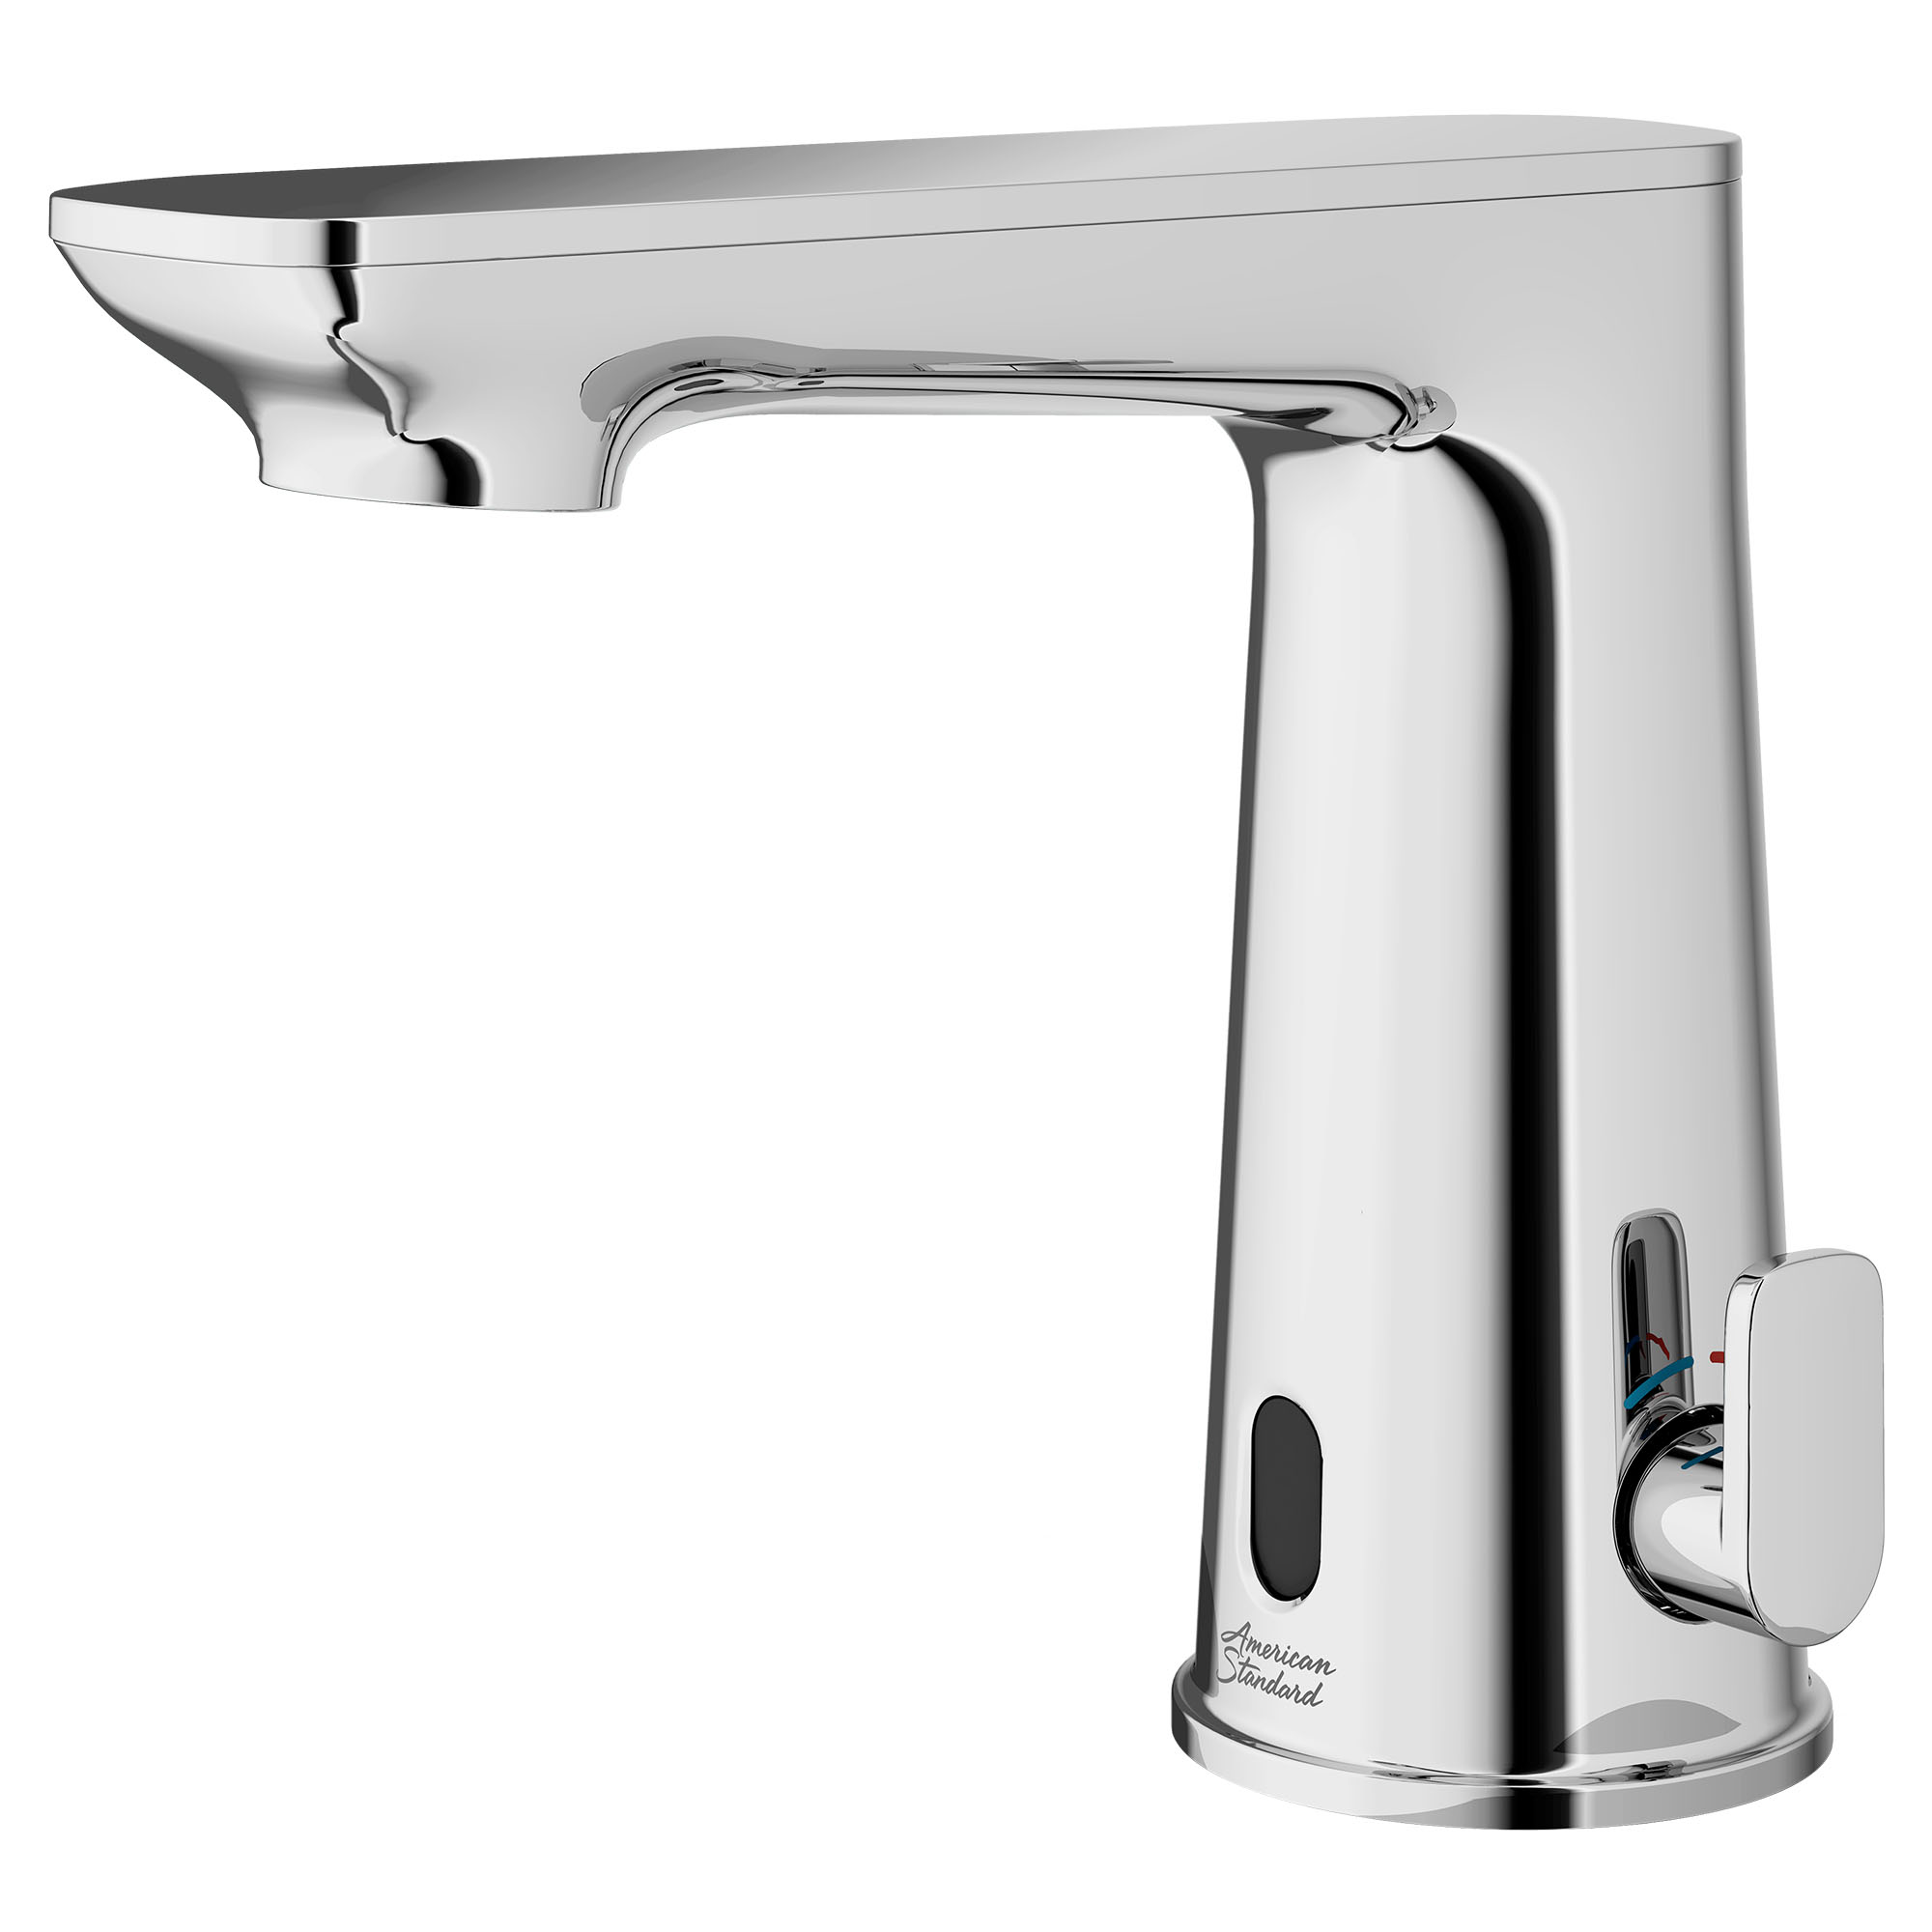 Clean IR Touchless Faucet, Battery-Powered with Above-Deck Mixing, 0.5 gpm/1.9 Lpm